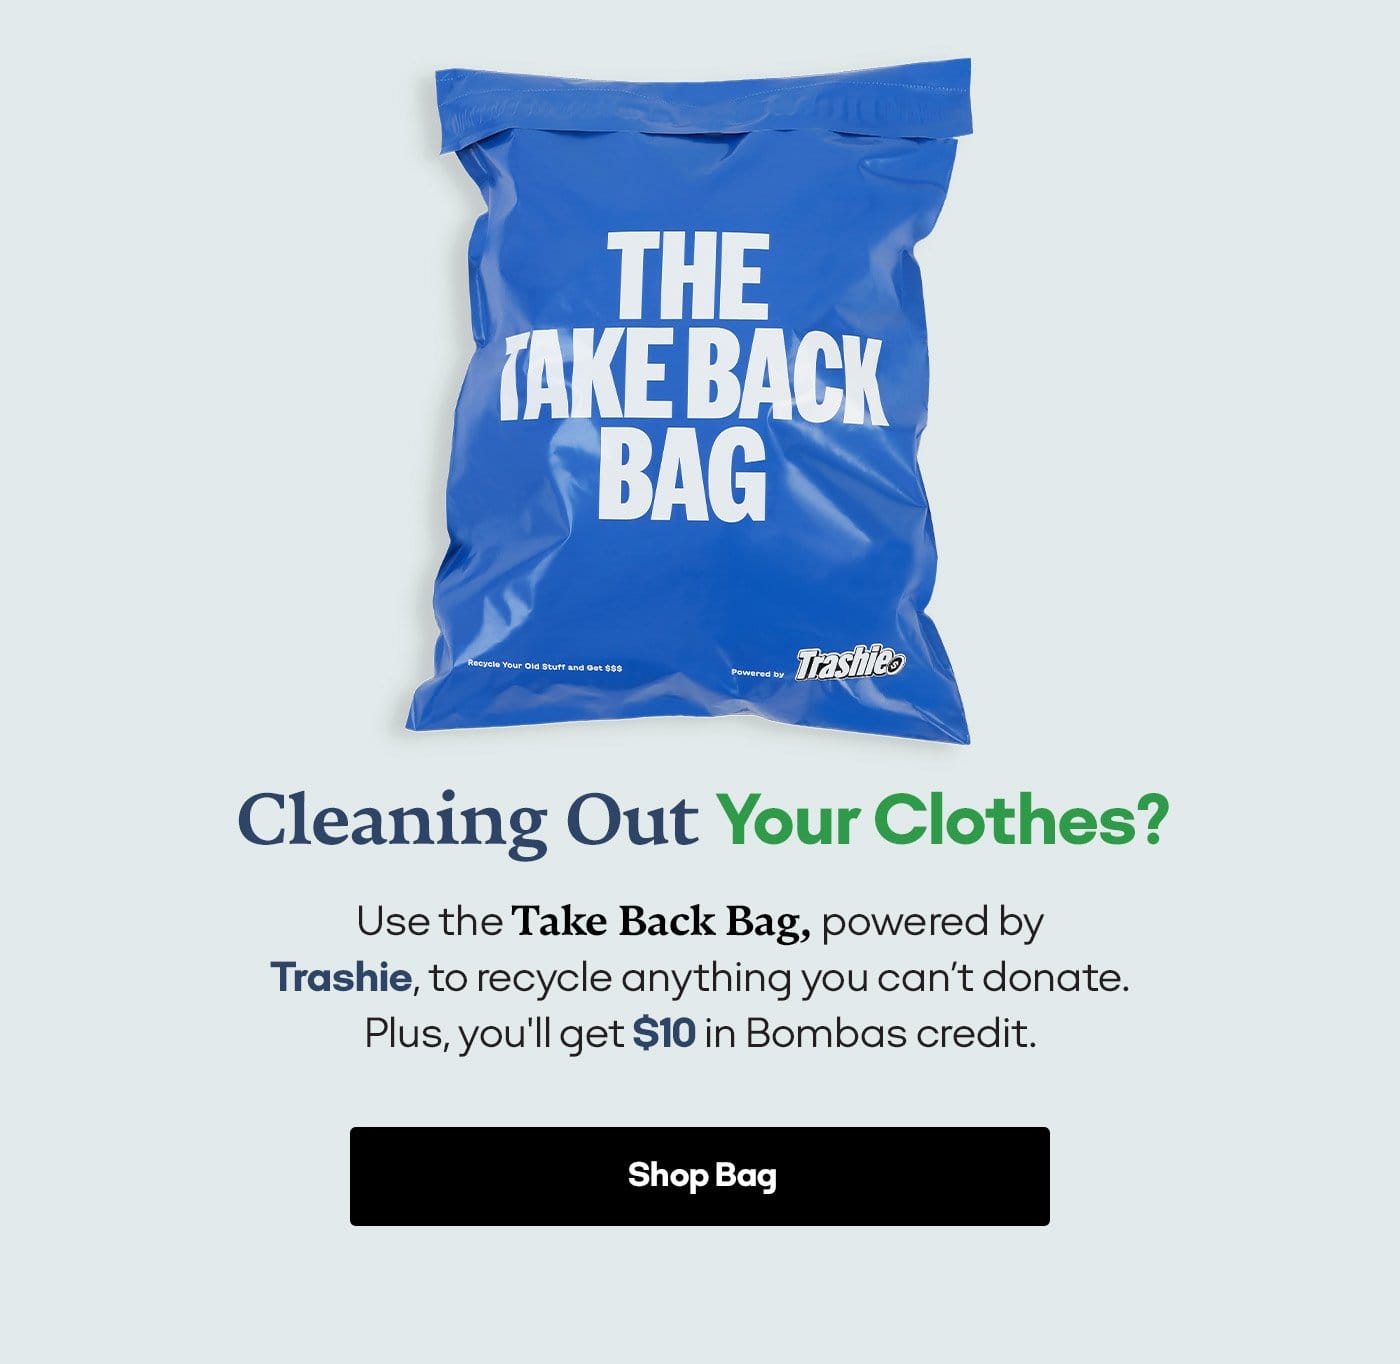 Cleaning Out Your Clothes? Use the Take Back Bag, powered by Trashie, to recycle anything you can't donate. Plus, you'll get \\$10 in Bombas credit. | Shop Bag